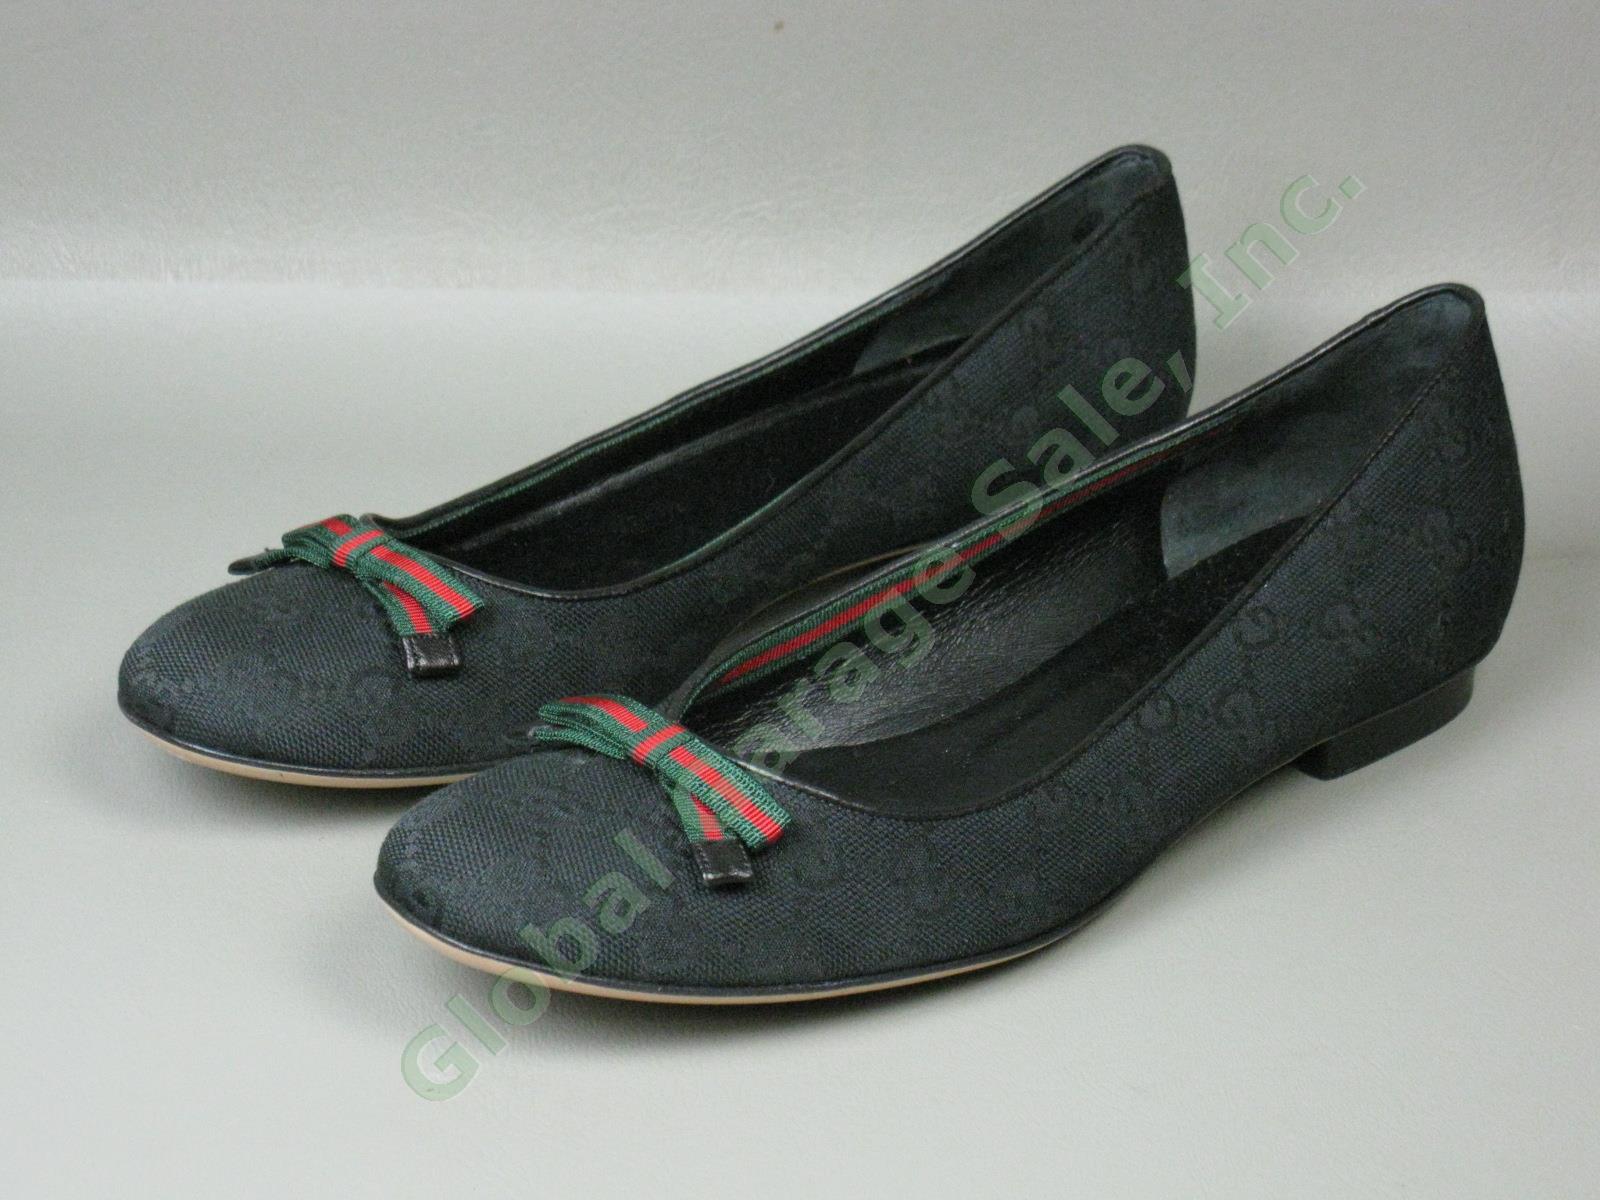 Womens Gucci Moca Tess S Cuoio Flats Size 7.5 Black One Owner With Box 161837 NR 3